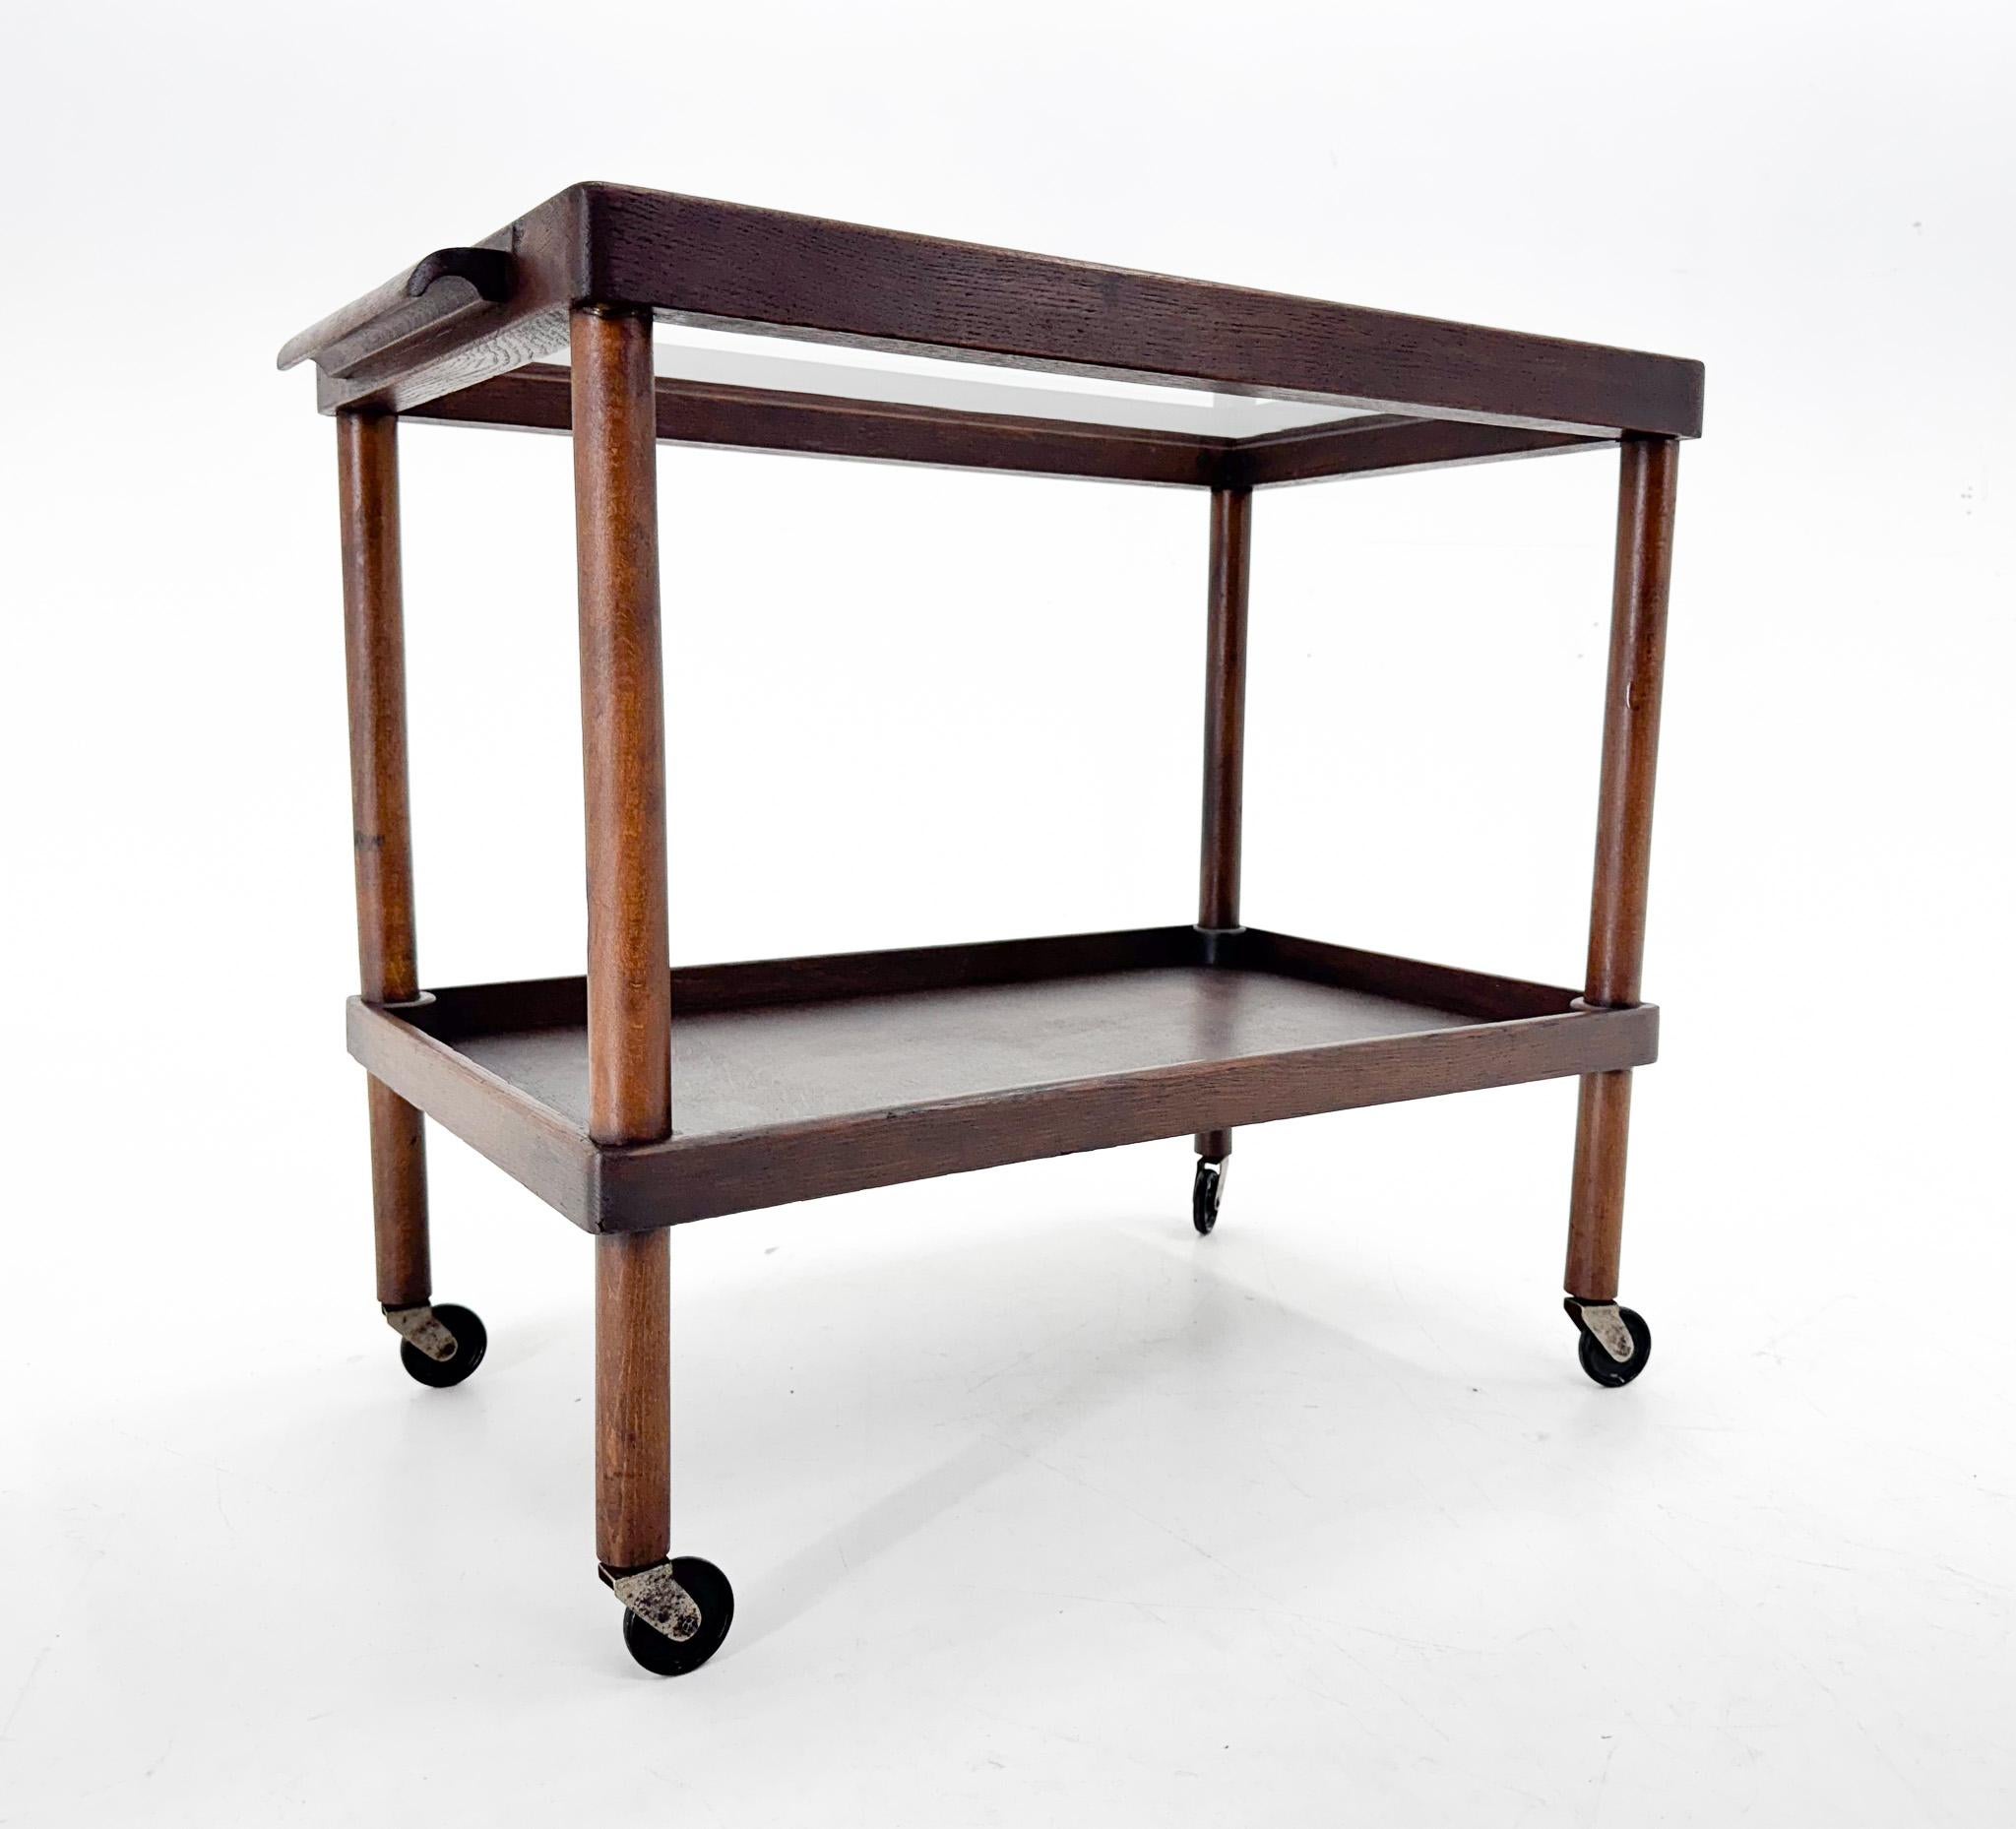 Elegant wooden bar cart / trolley on wheels with one handle and glass top. The glass is original and so has some slight signs of use.